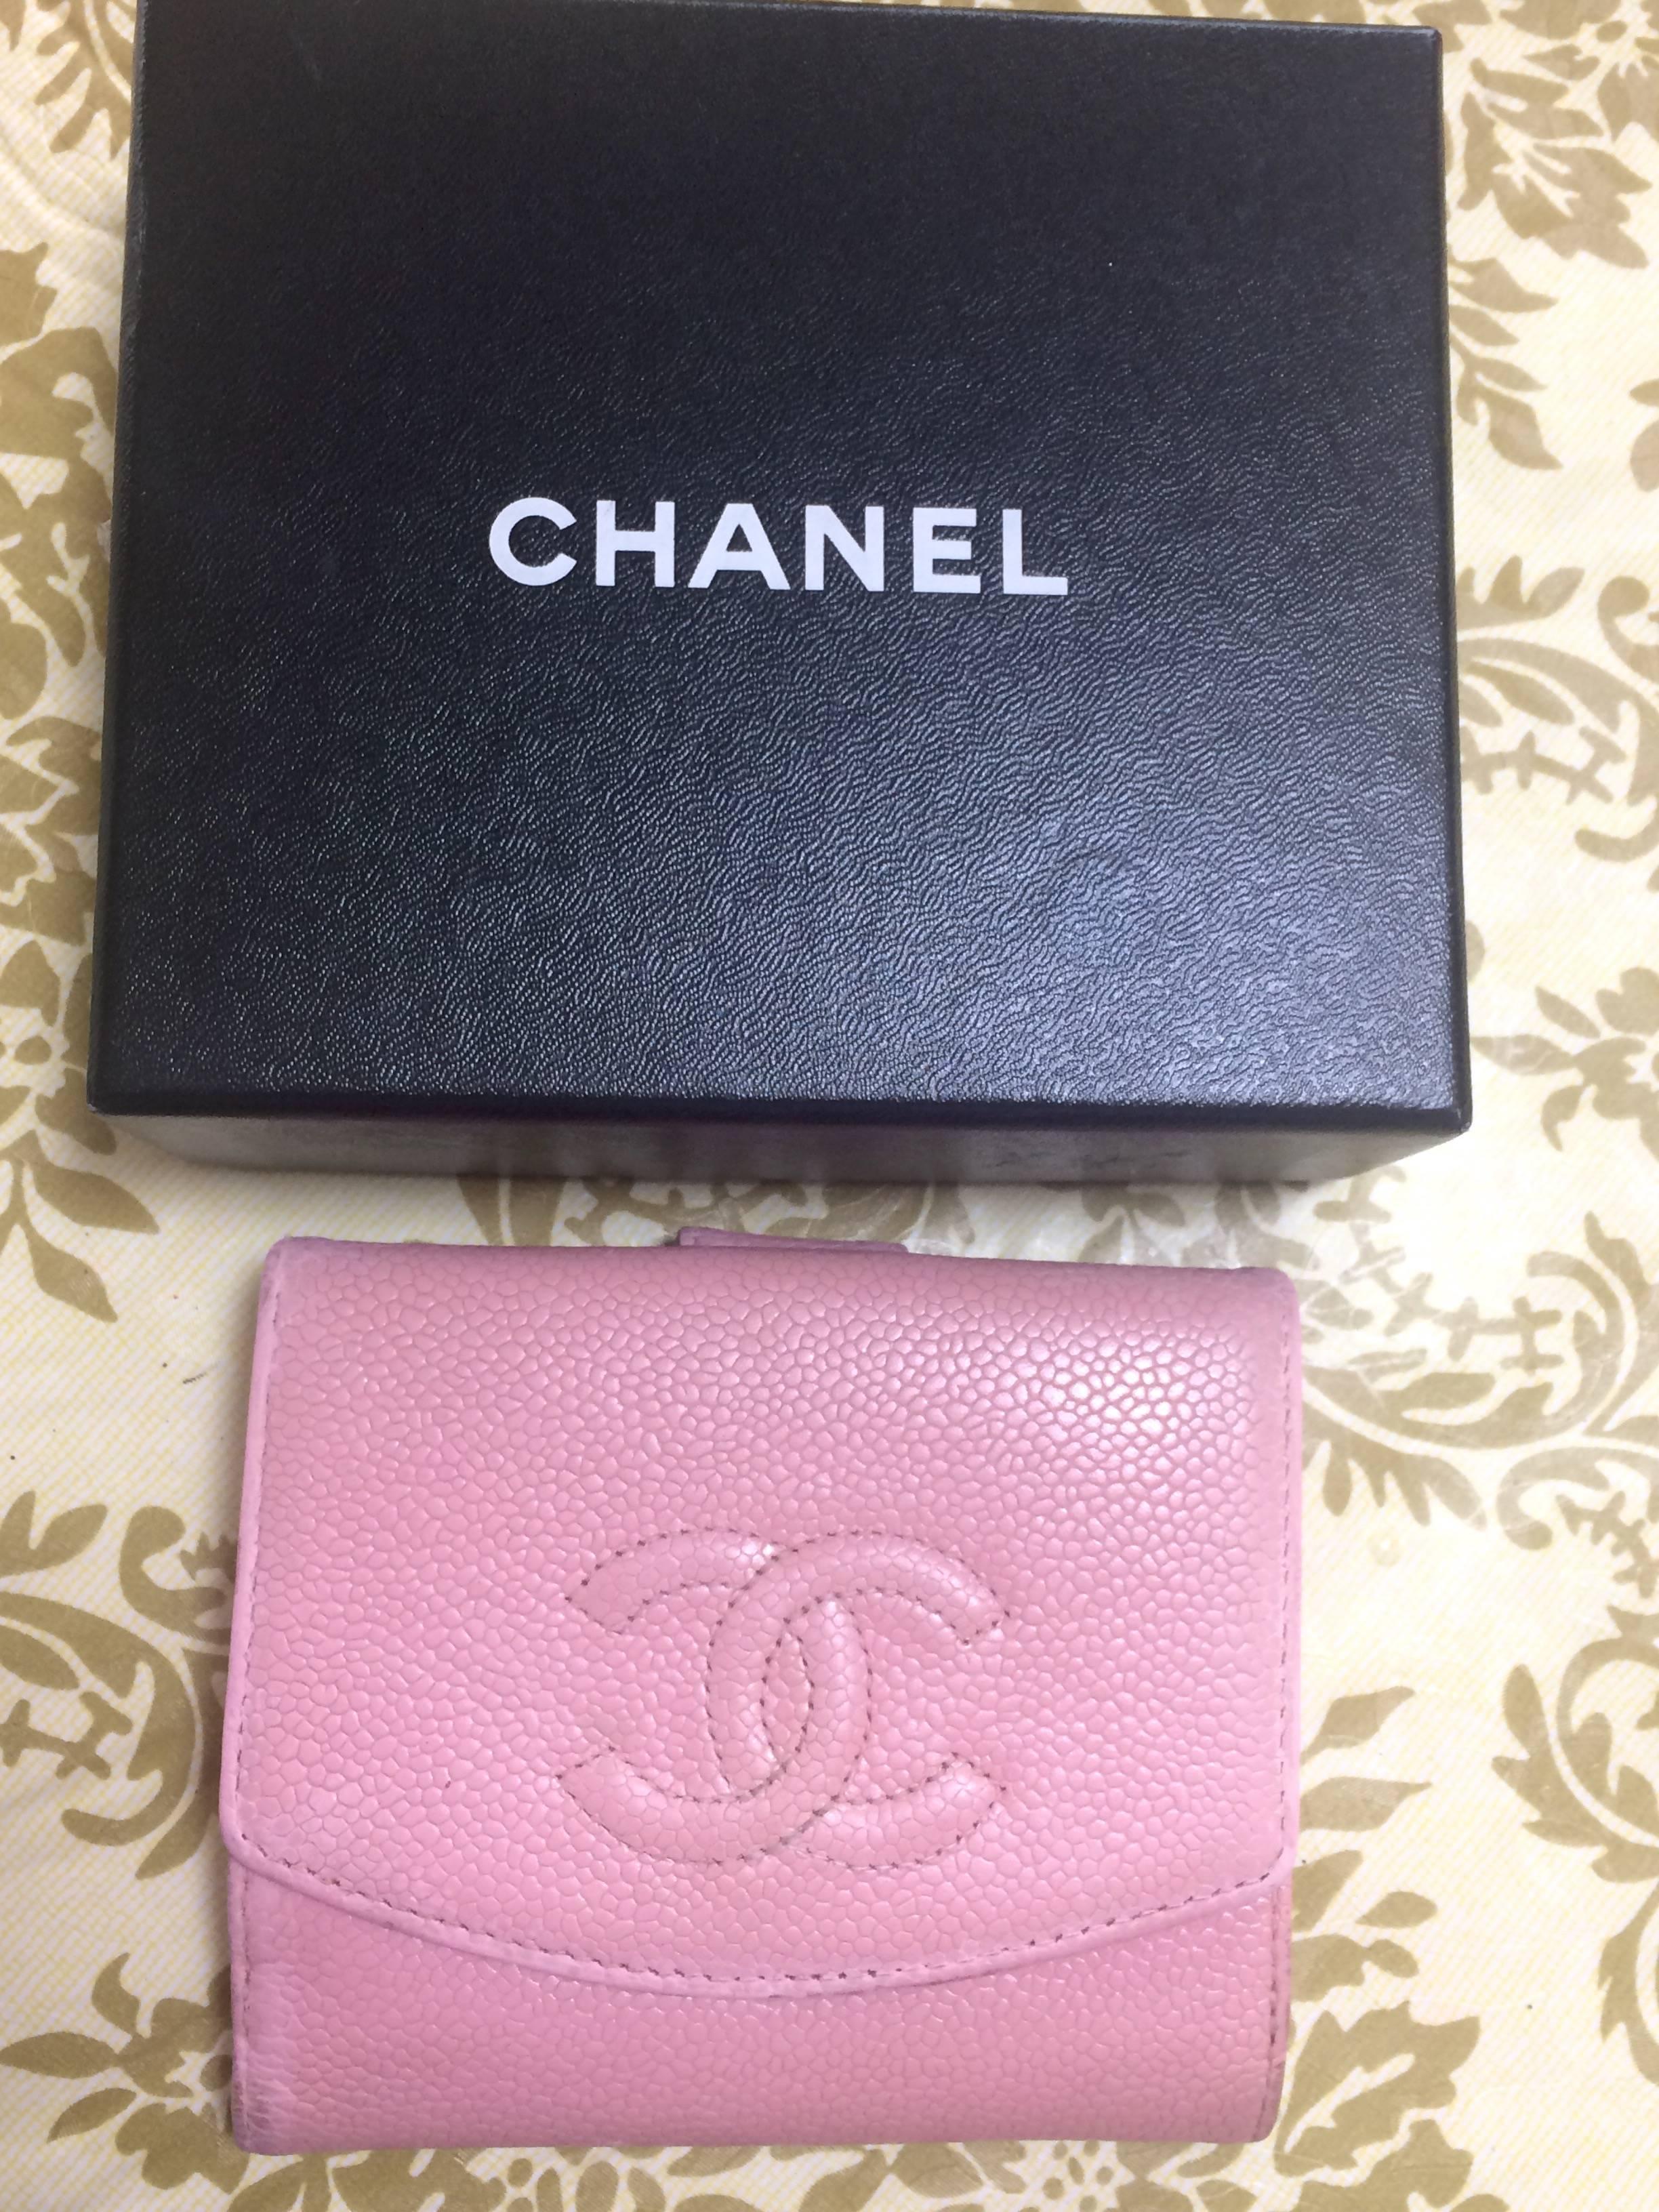 Vintage CHANEL milky pink caviar leather wallet with stitched CC mark. Classic piece.

This is a CHANEL vintage wallet in milky pink caviar leather. 
Mod, simple and so chic!
 It is something that would never go out of style.
The CC stitched mark at